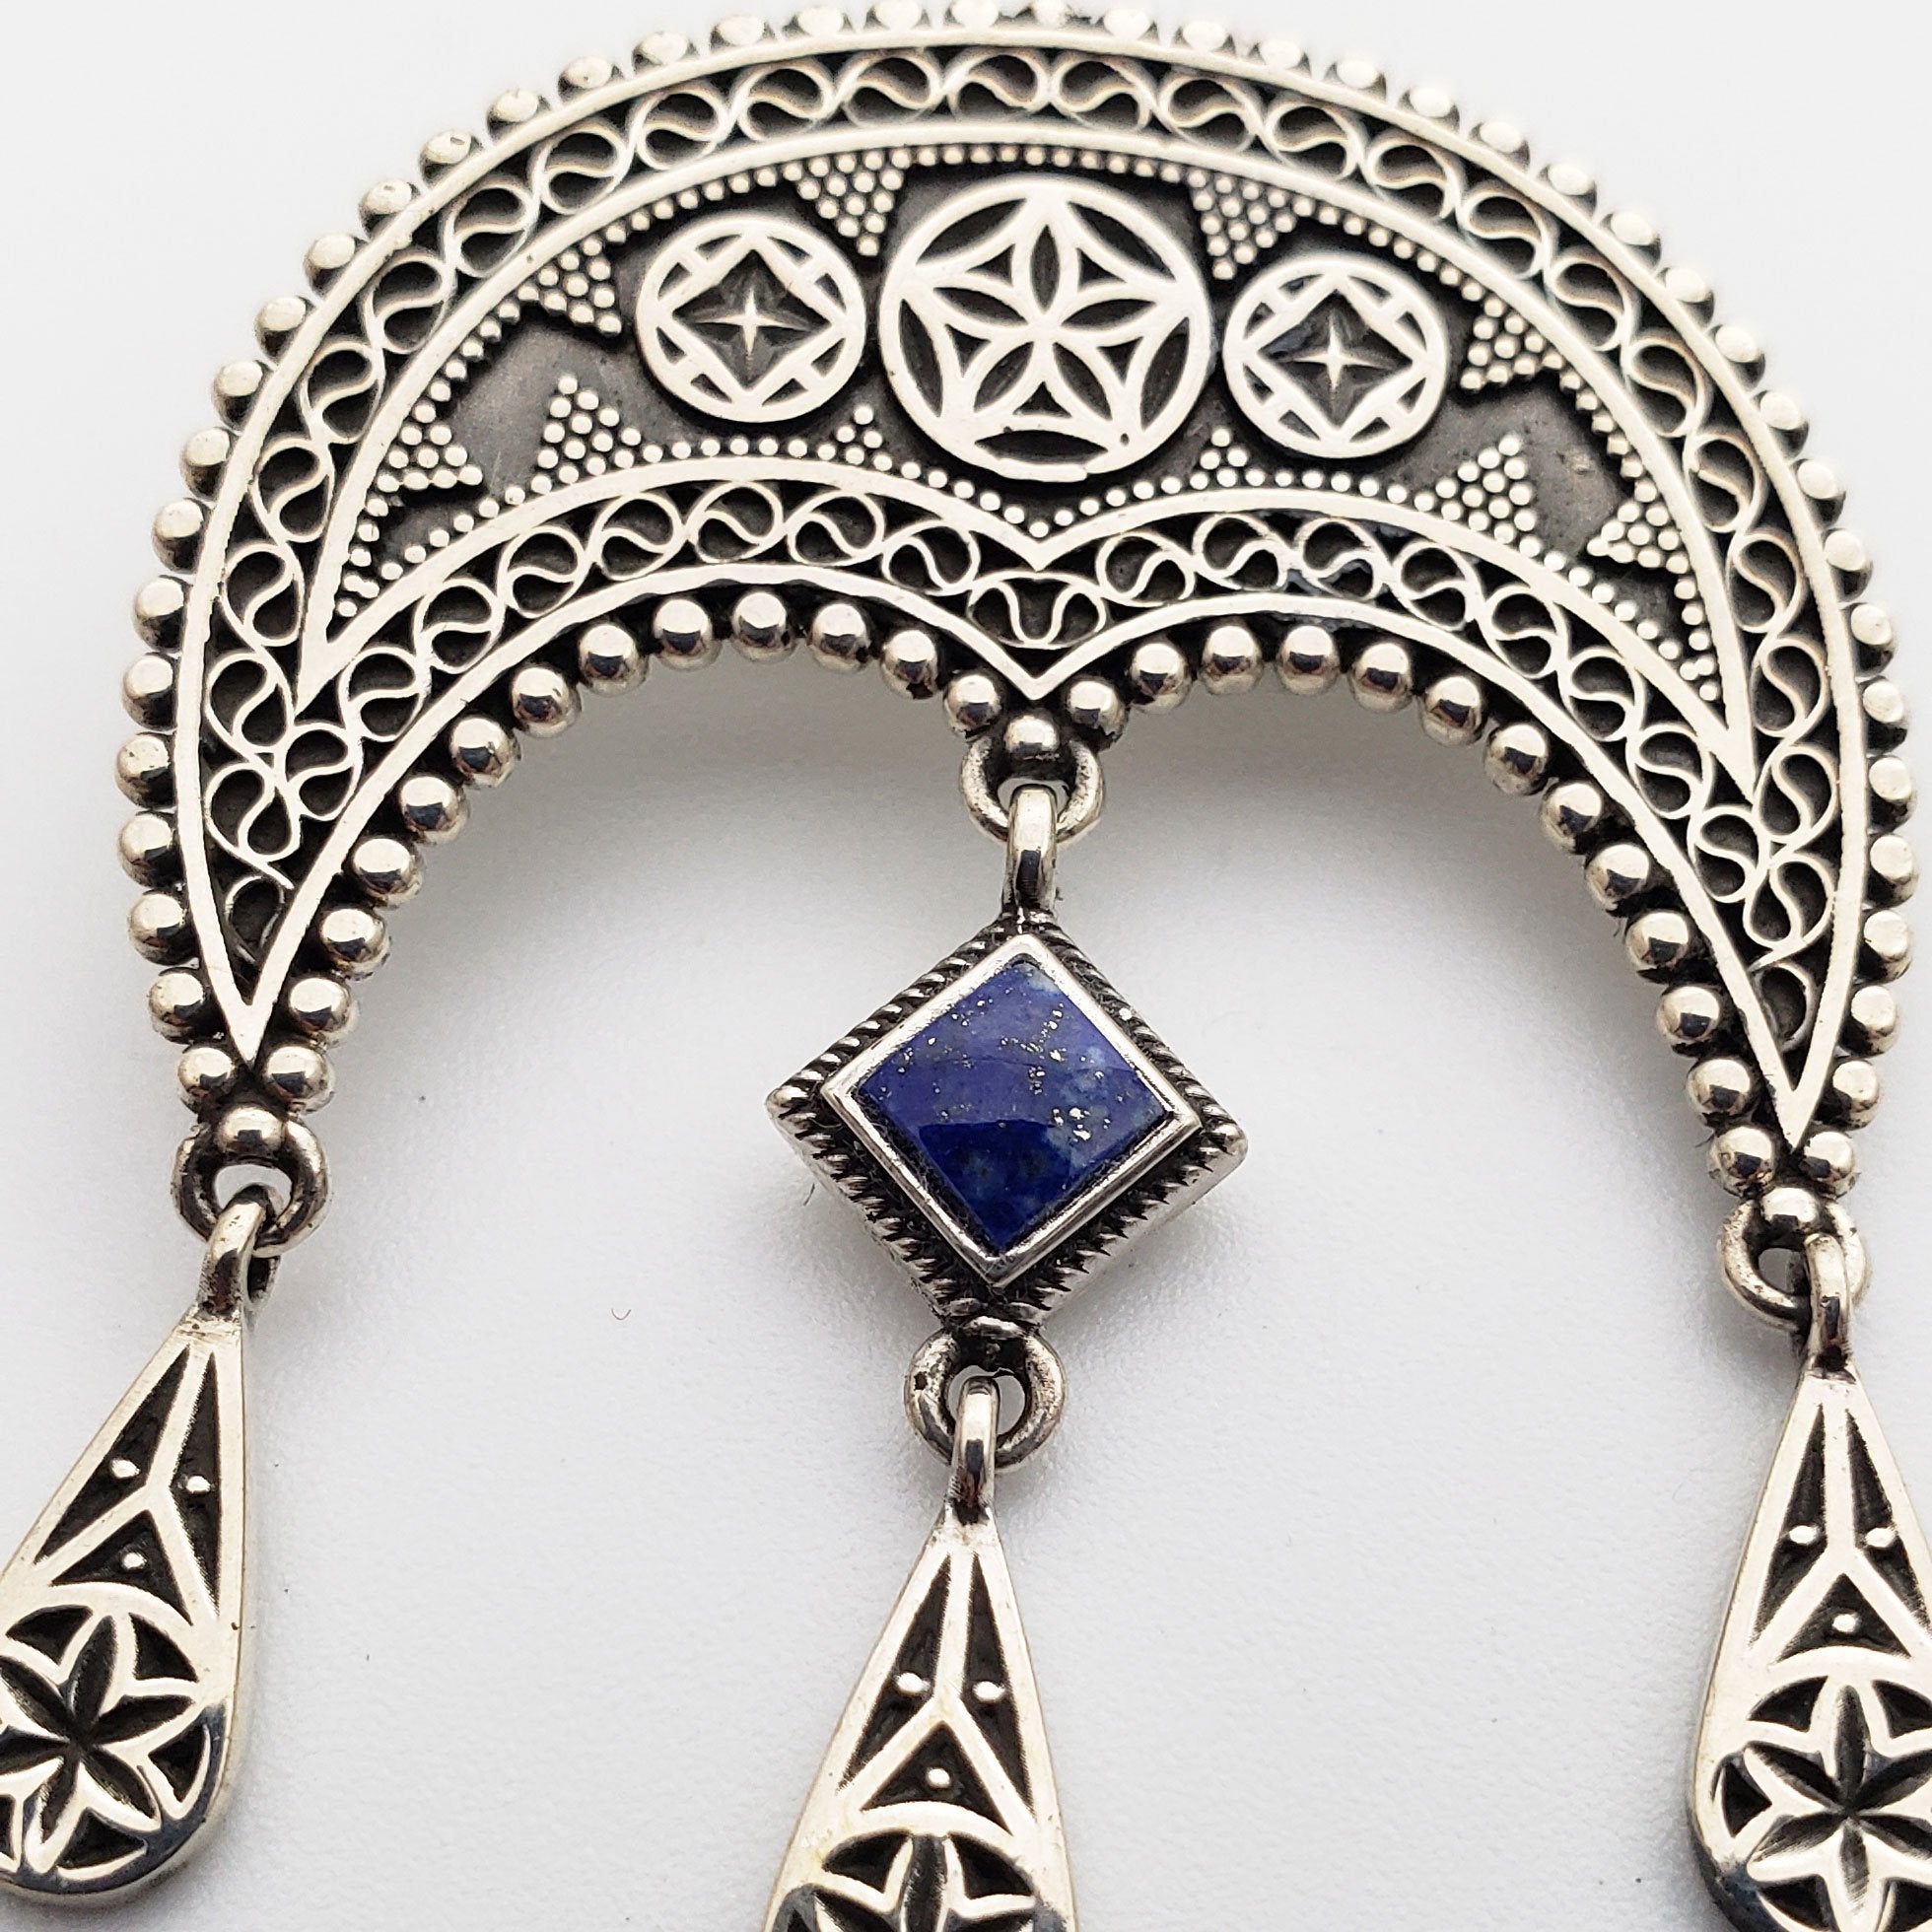 Arm Root Daghdghan Brooch with Lapis Lazuli